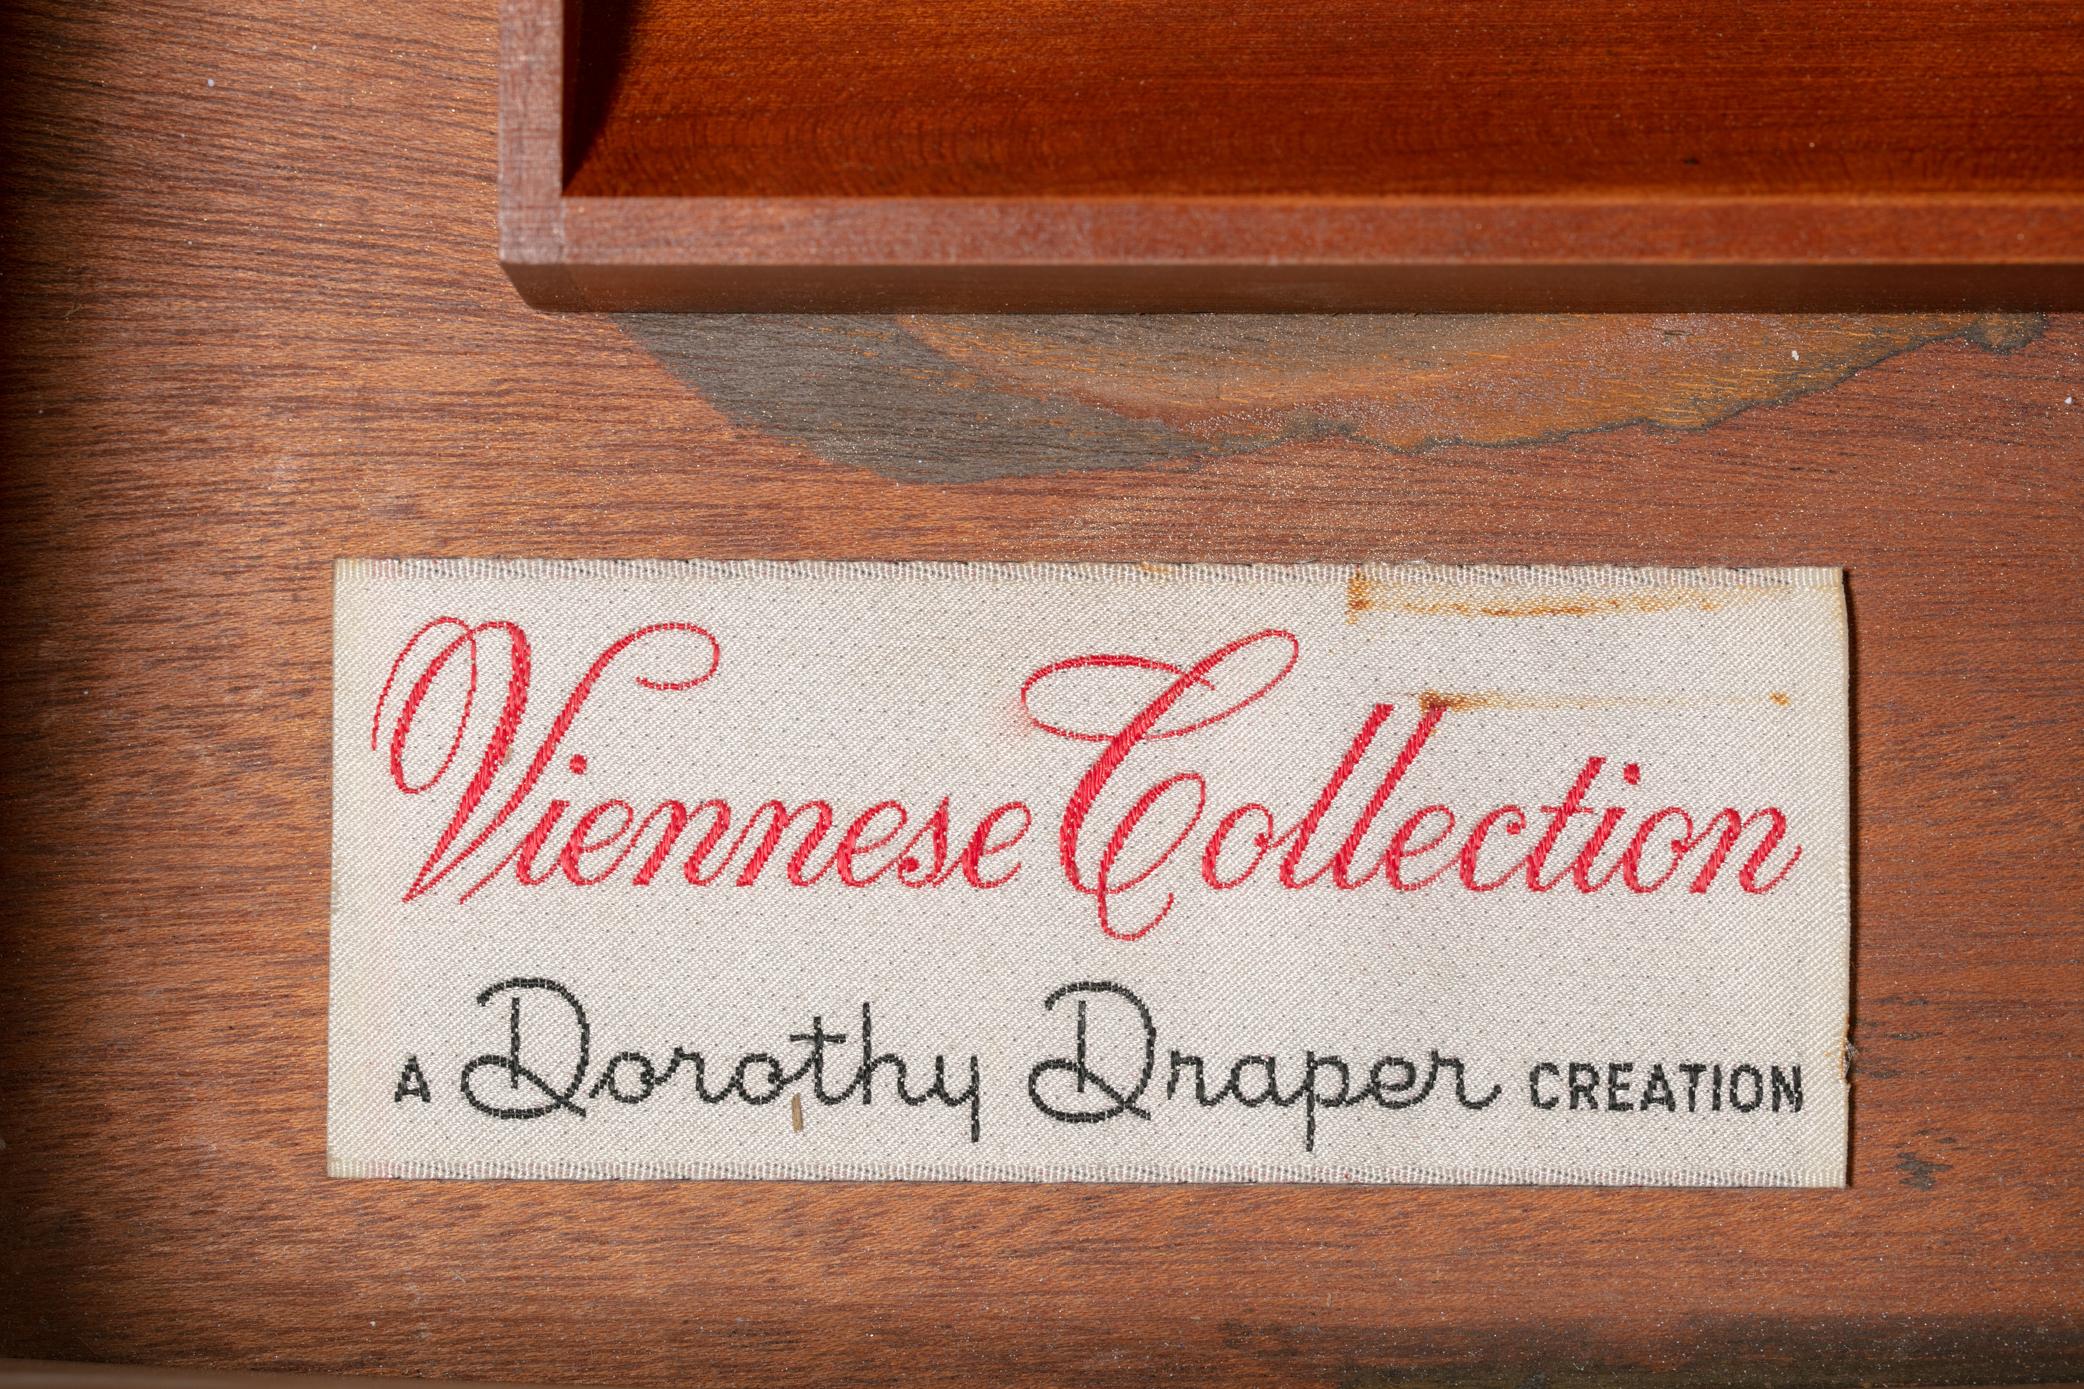 Dorothy Draper Viennese Collection Chest Lacquered in Ivory, circa 1963 For Sale 8